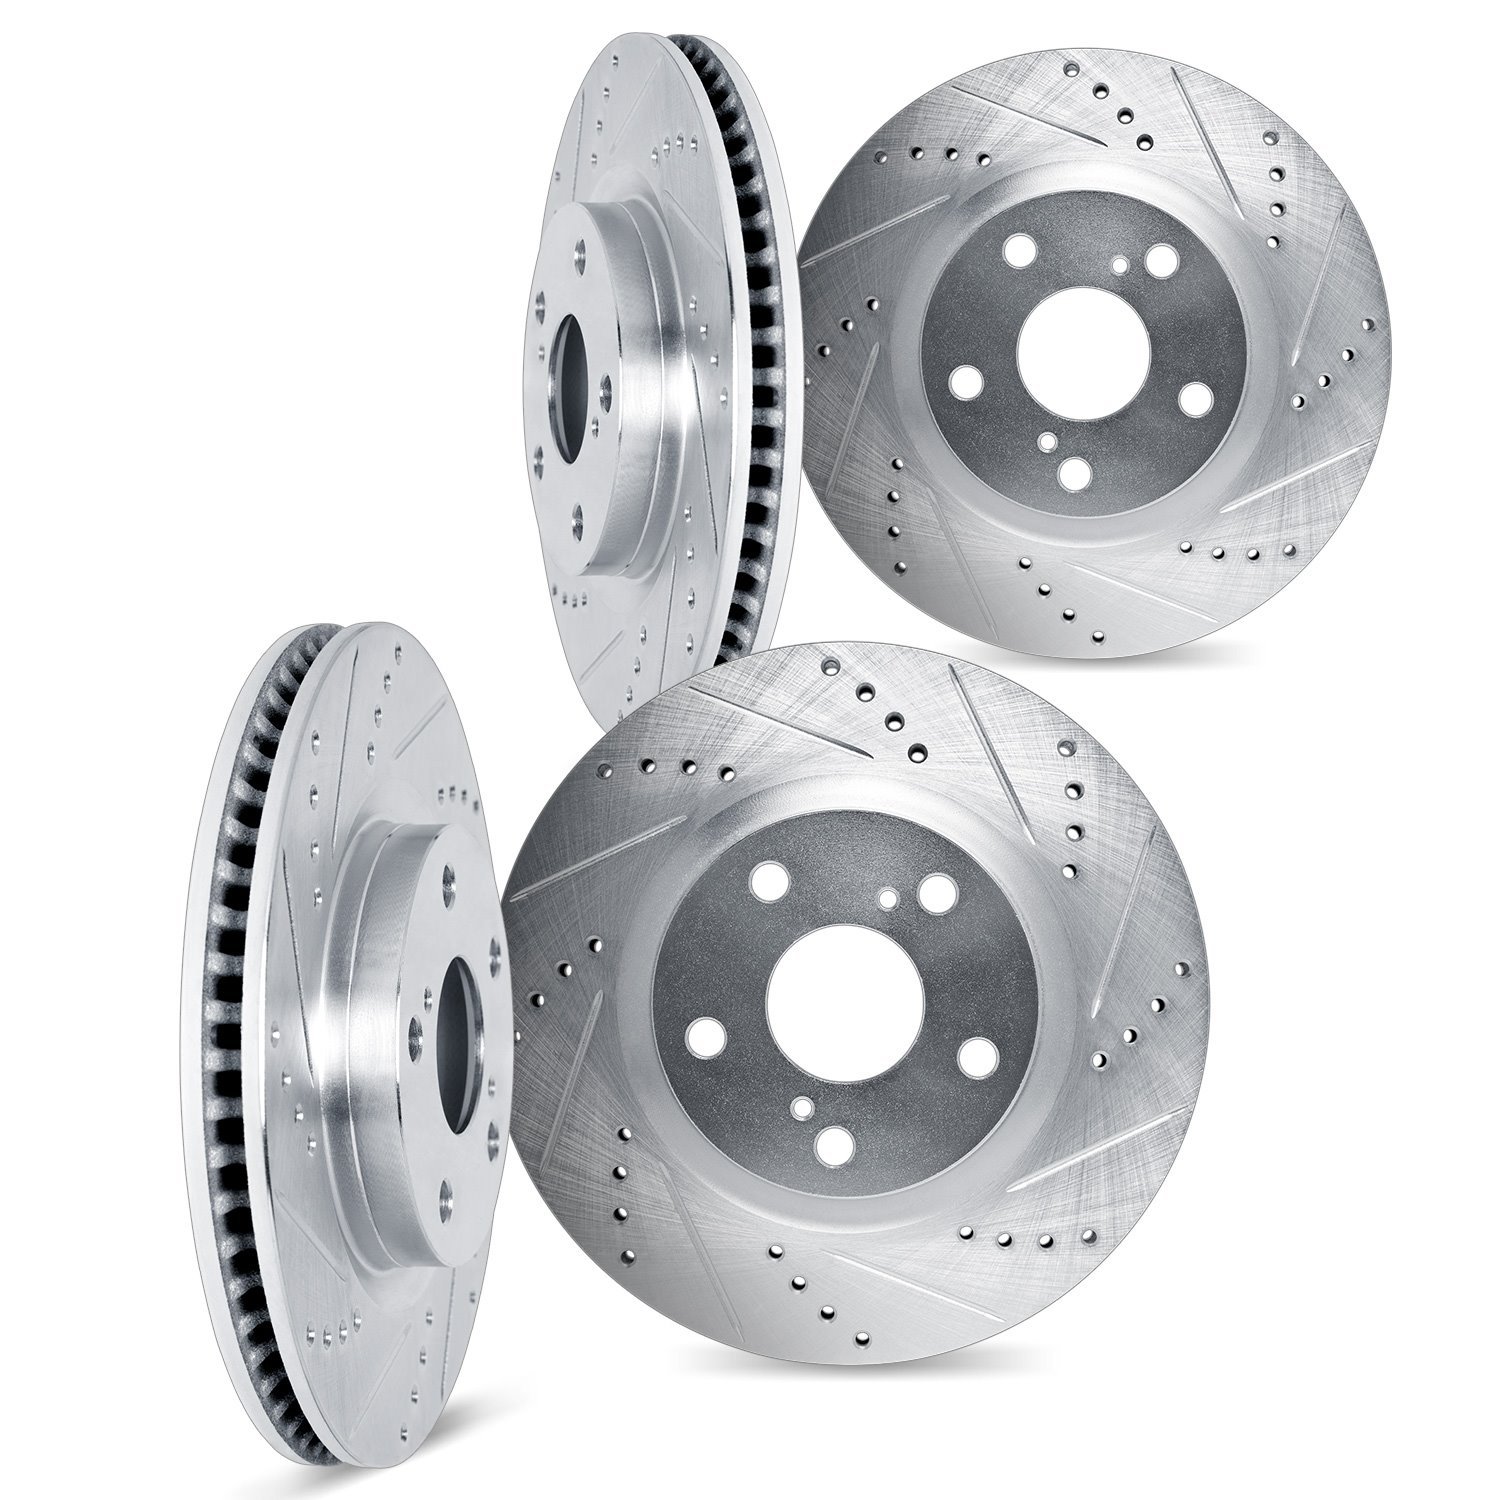 7004-75021 Drilled/Slotted Brake Rotors [Silver], 1995-2000 Lexus/Toyota/Scion, Position: Front and Rear